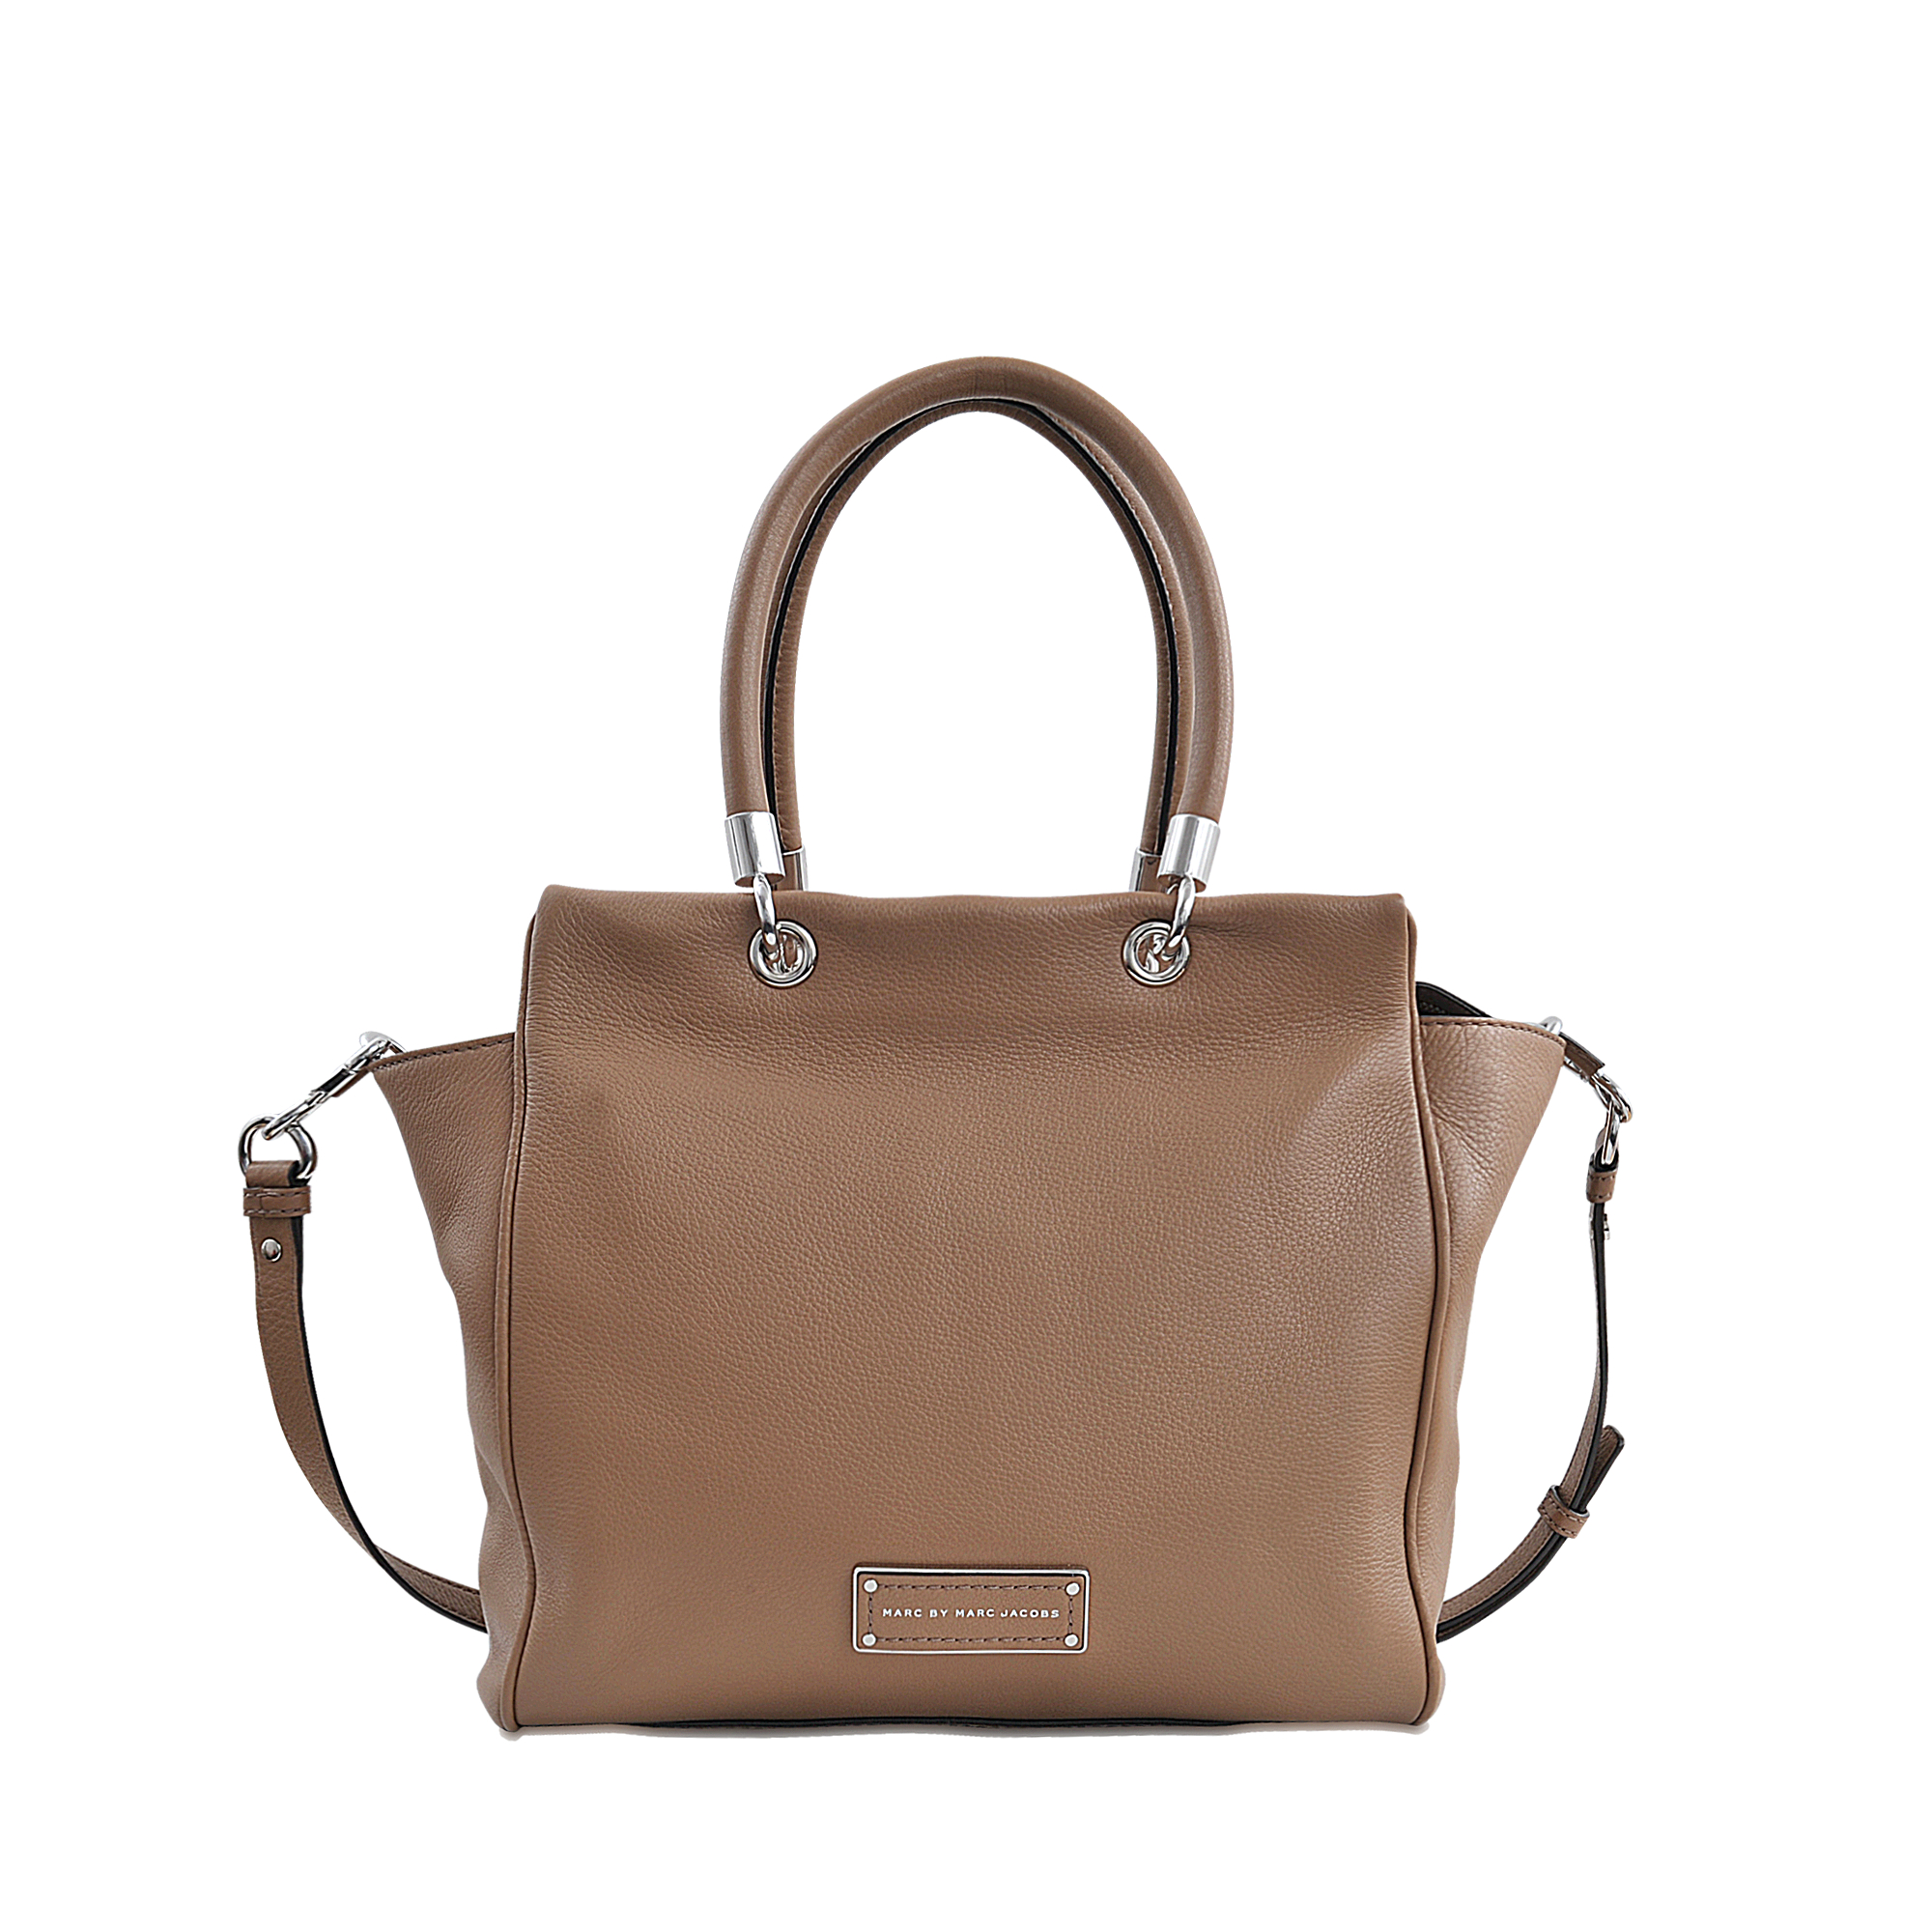 Marc by marc jacobs Too Hot To Handle Bentley Bag in Brown | Lyst